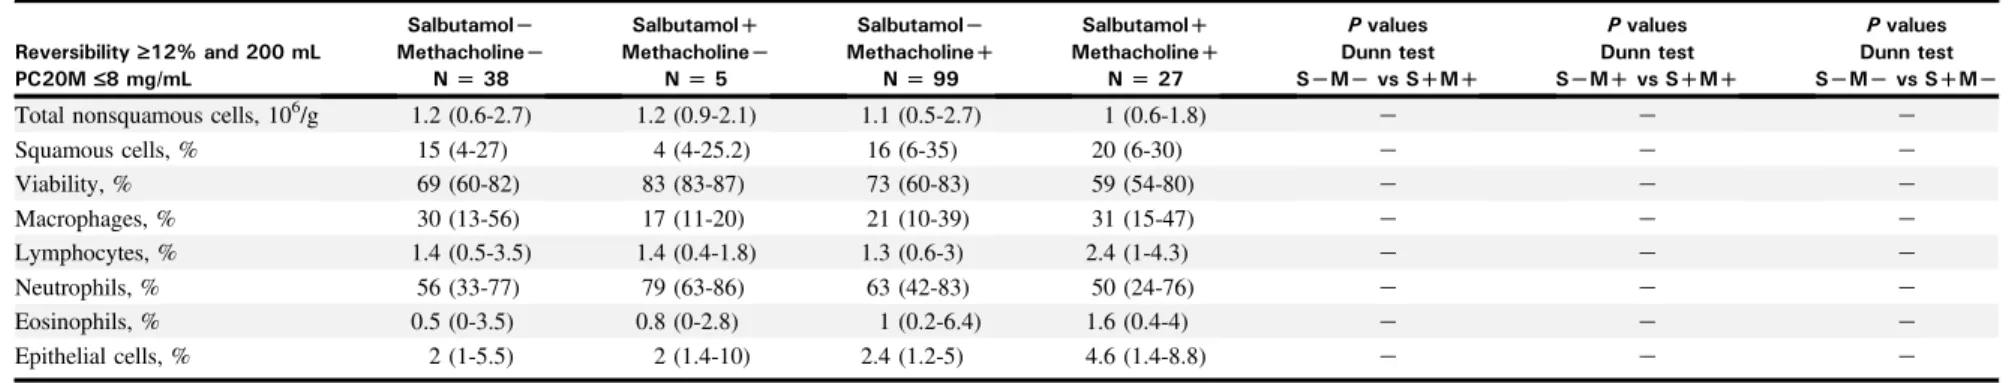 TABLE E4. Sputum cells counts when asthma was diagnosed by the criteria: Reversibility  12% and 200 mL and/or PC20M  8 mg/mL Reversibility ‡ 12% and 200 mL PC20M £ 8 mg/mL Salbutamol LMethacholine LN[38 Salbutamol DMethacholine LN[5 Salbutamol LMethacholin